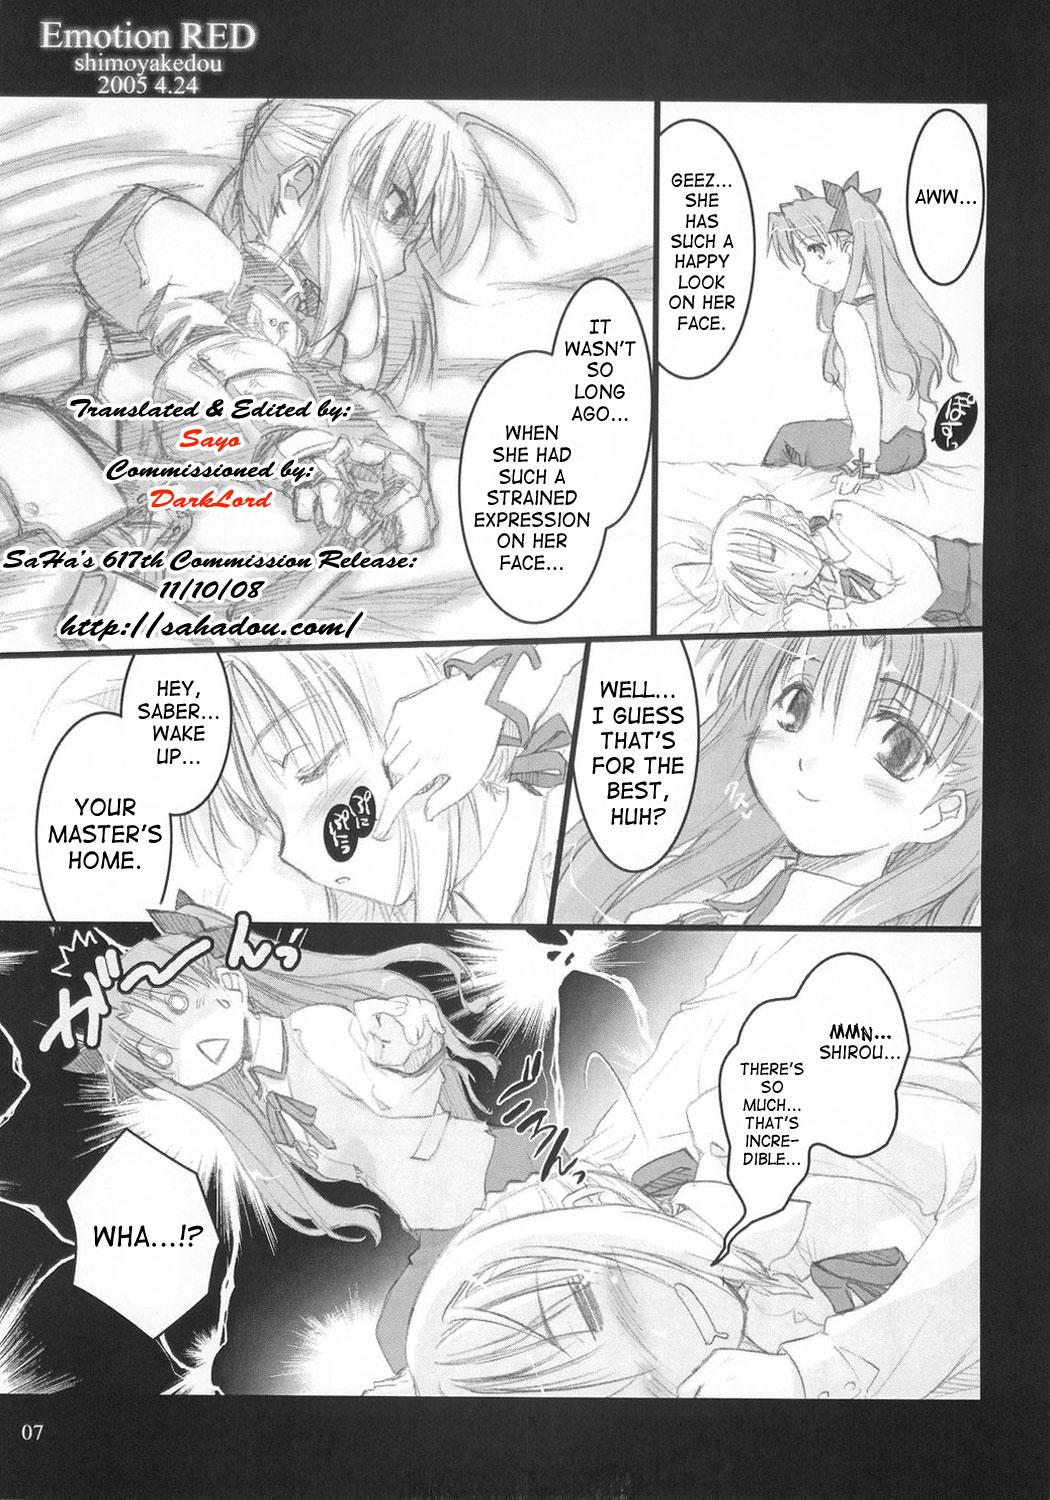 Teensex Emotion RED - Fate stay night Gaysex - Page 6